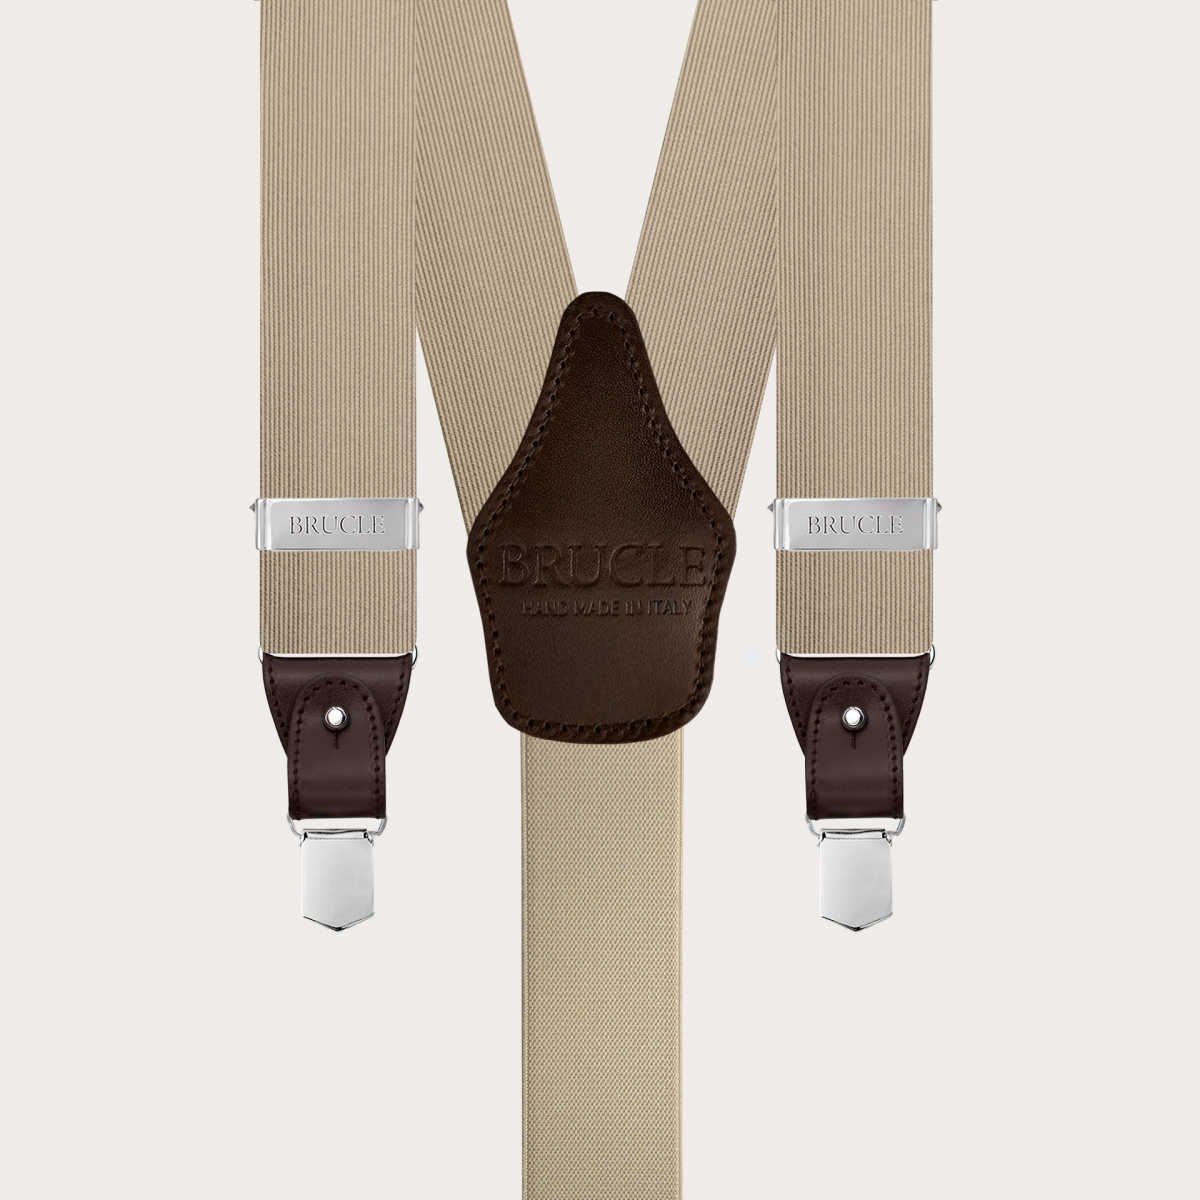 Men's suspenders in champagne silk for buttons or clips